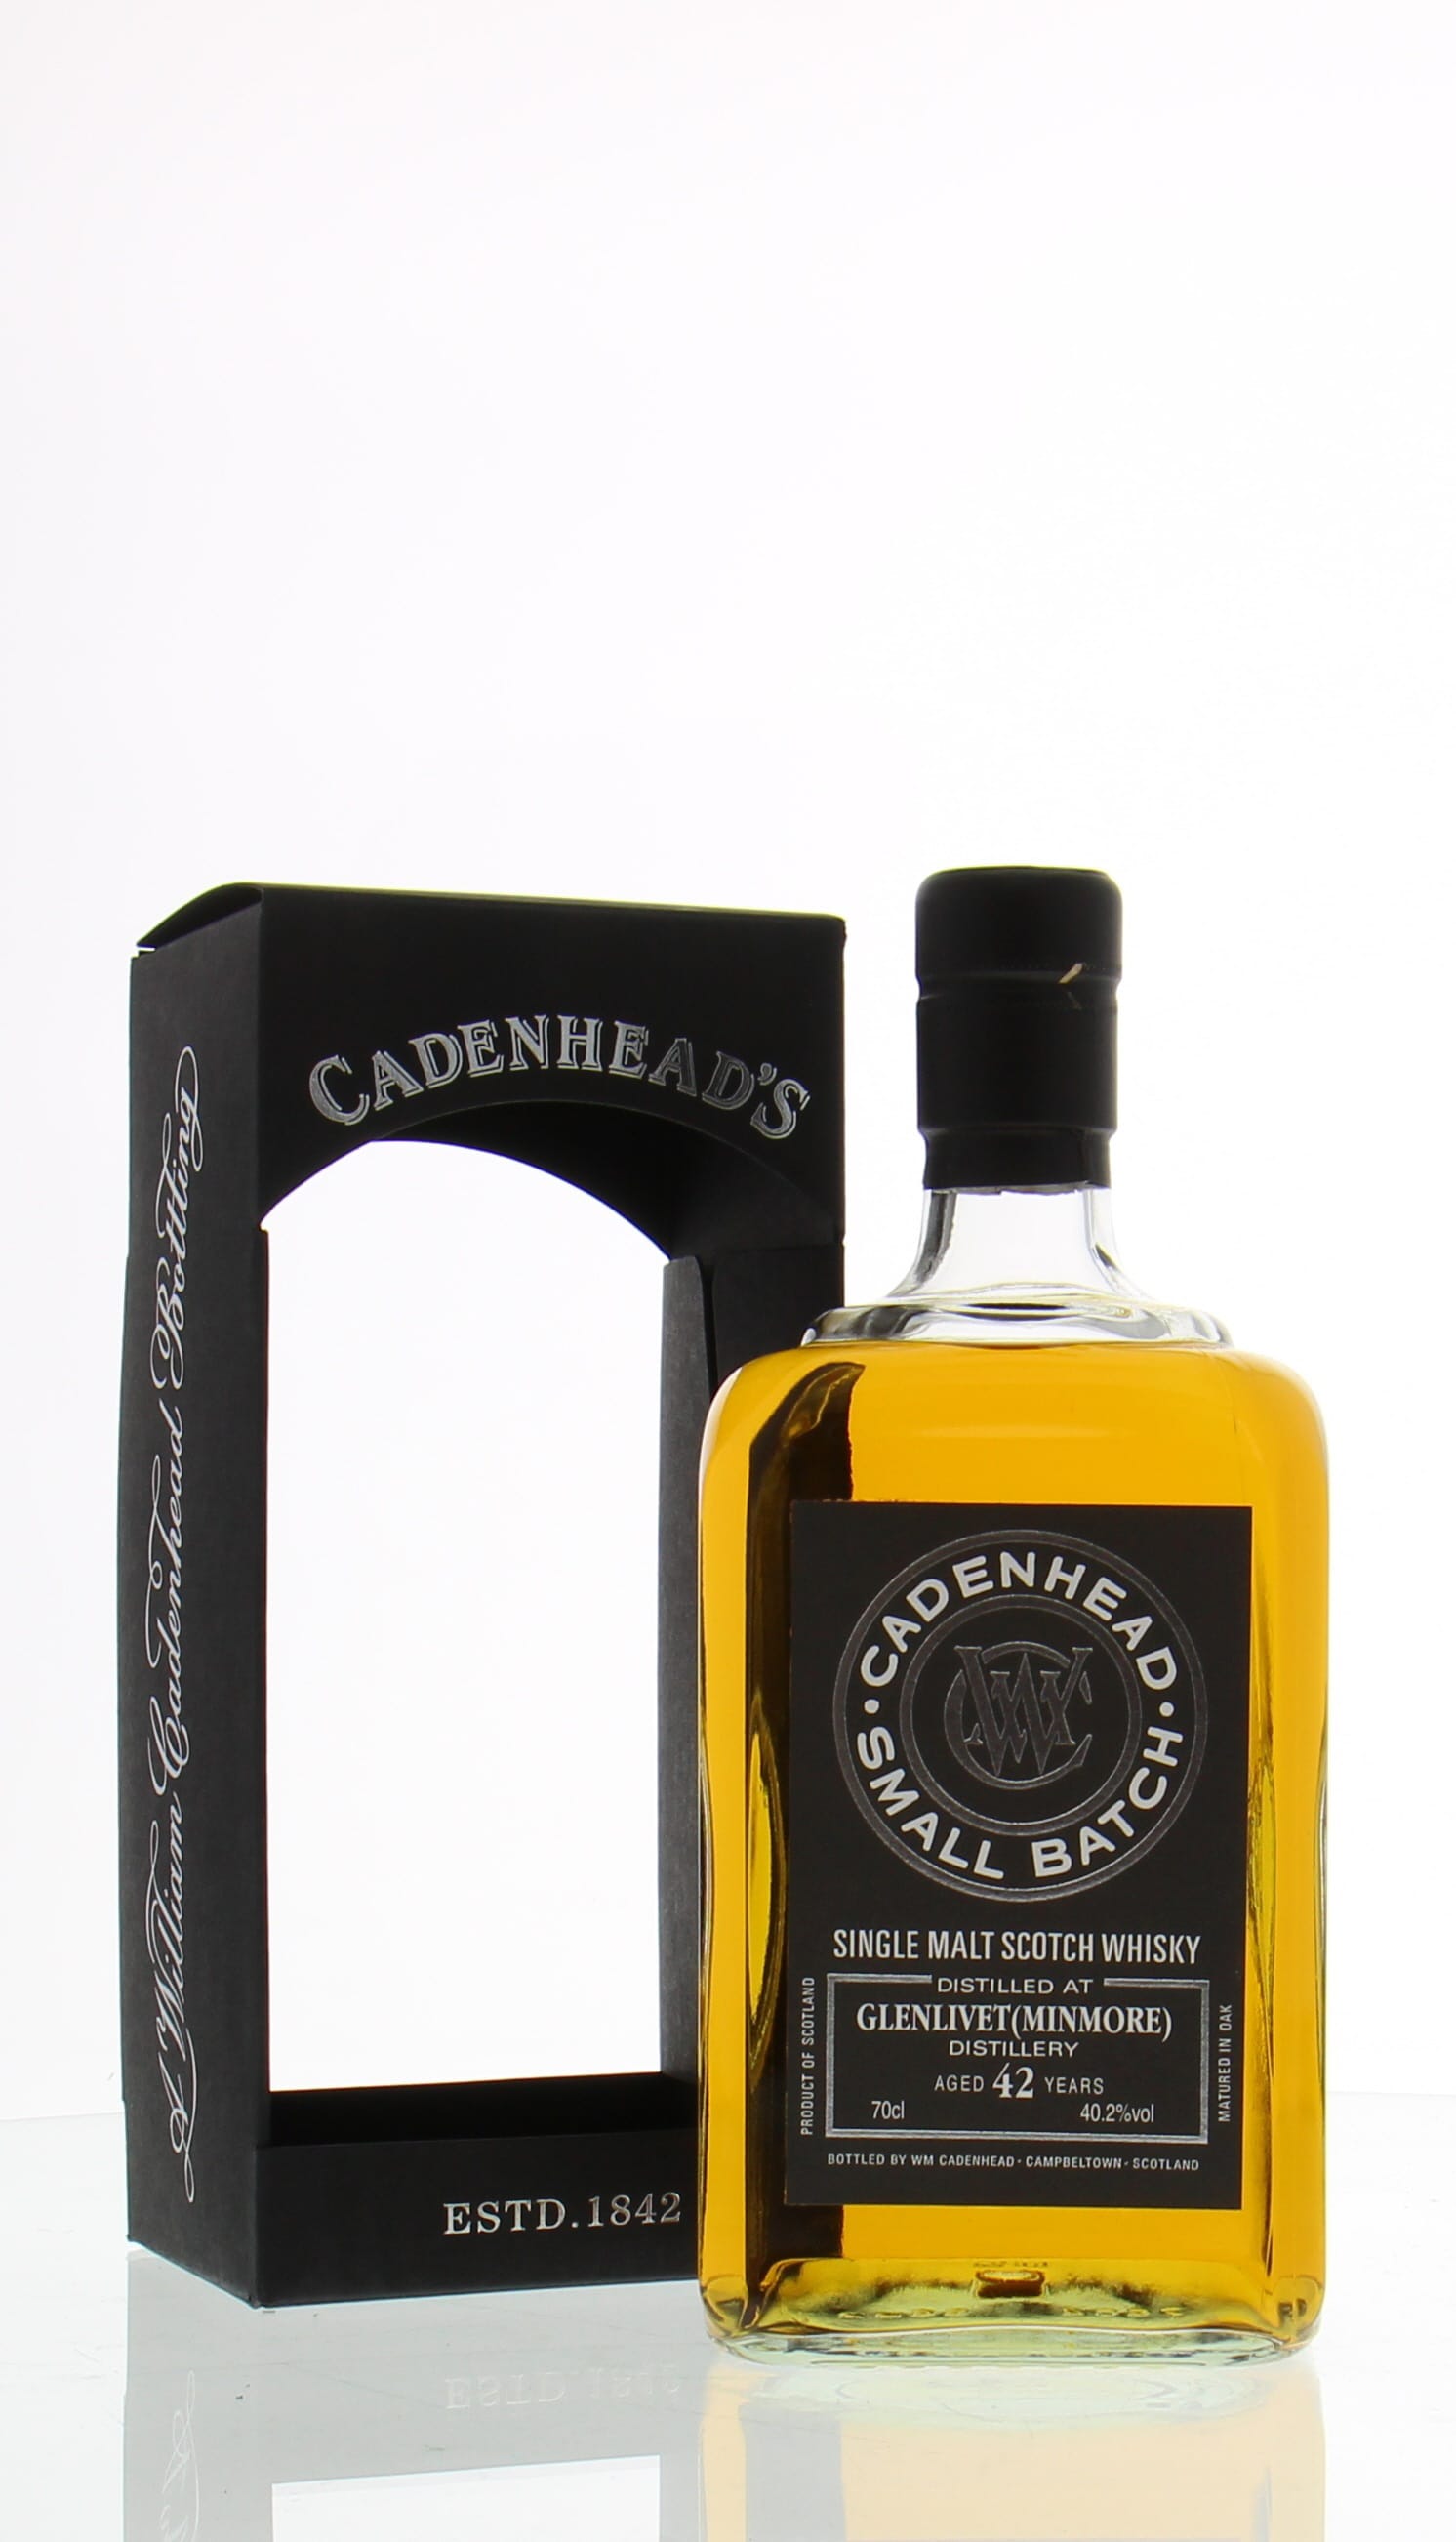 Glenlivet - 42 Years Old (Minimore) Cadenhead Small Batch 40.2% 1973 Perfect